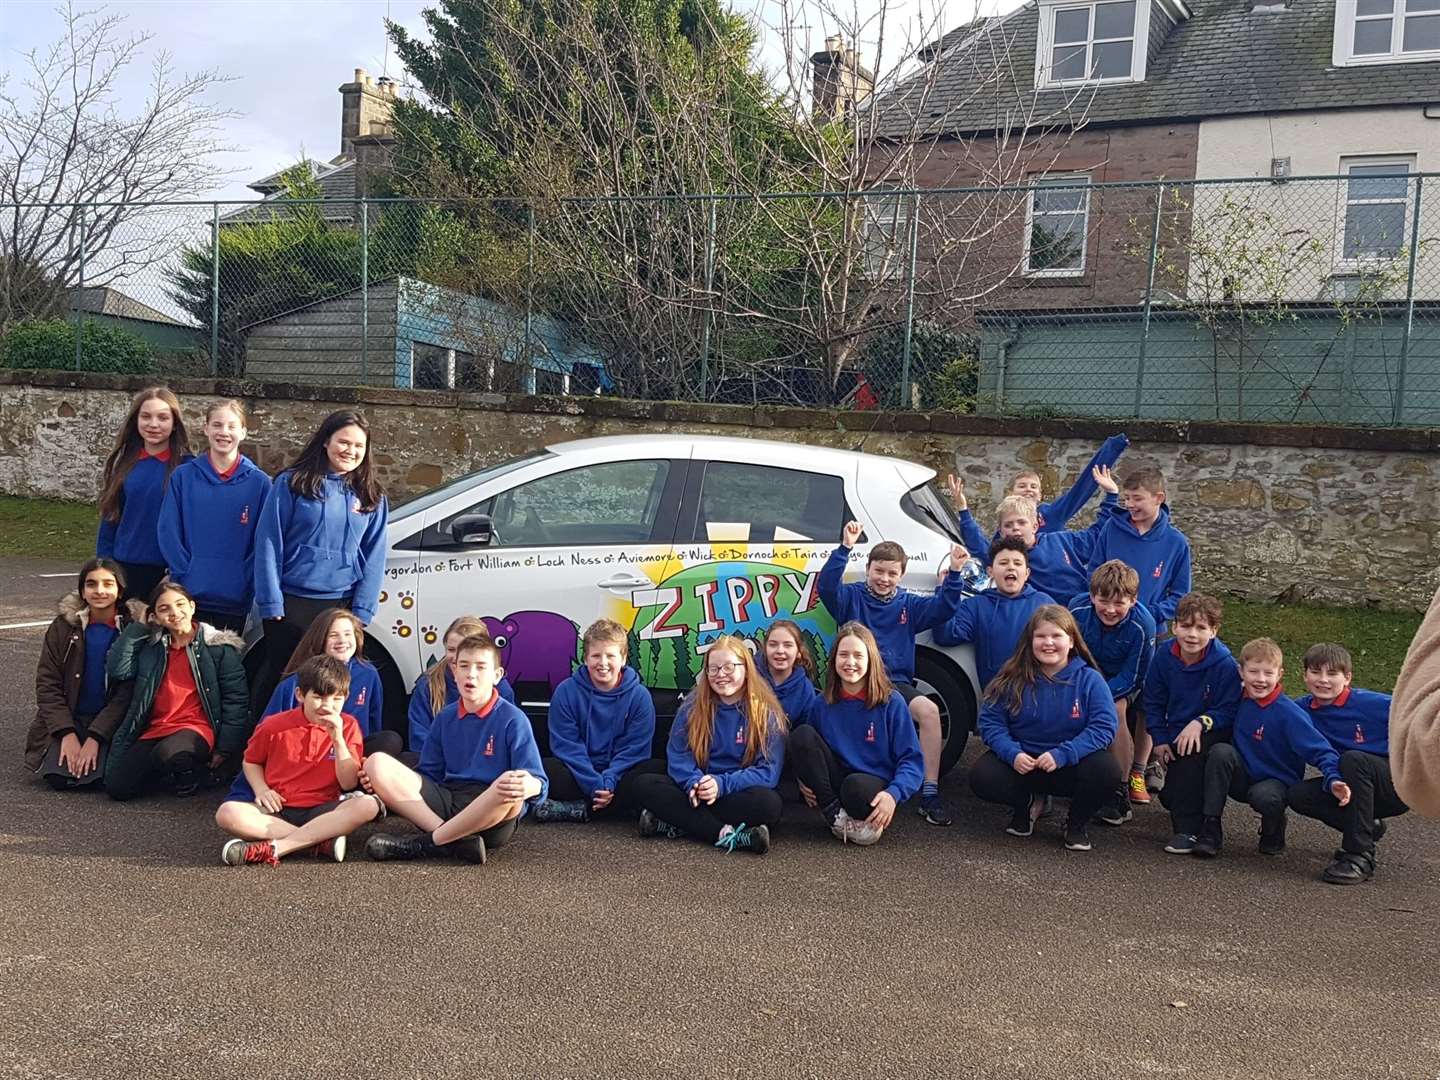 Crown Primary pupils with winner Aysha Reid (long hair standing nearest wing mirror) and Highland Council's Electric Vehicle (EV) Zippy Zoe.